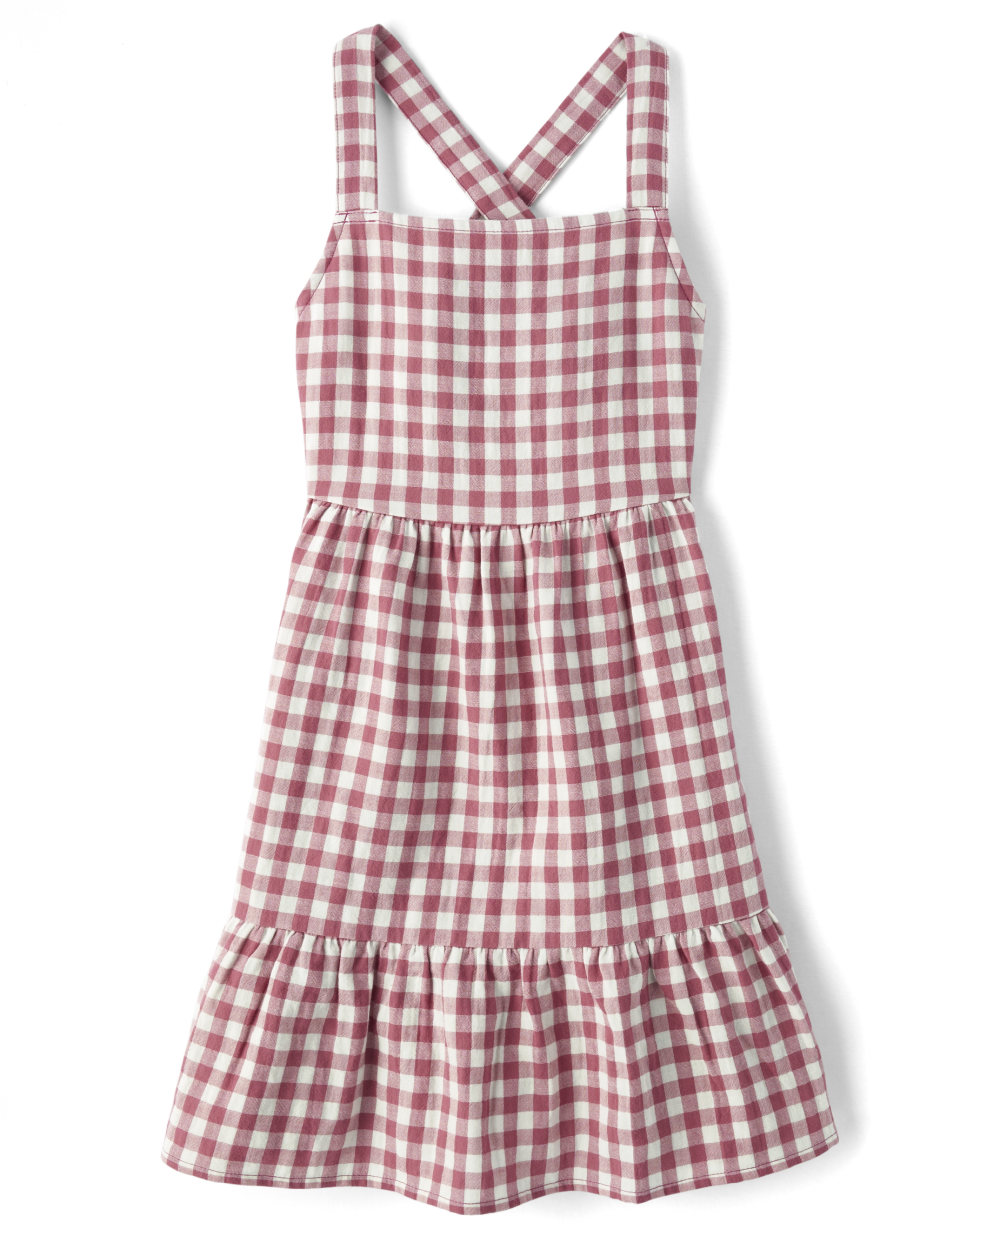 Girls Sleeveless Above the Knee Square Neck Checkered Gingham Print Dress With Ruffles